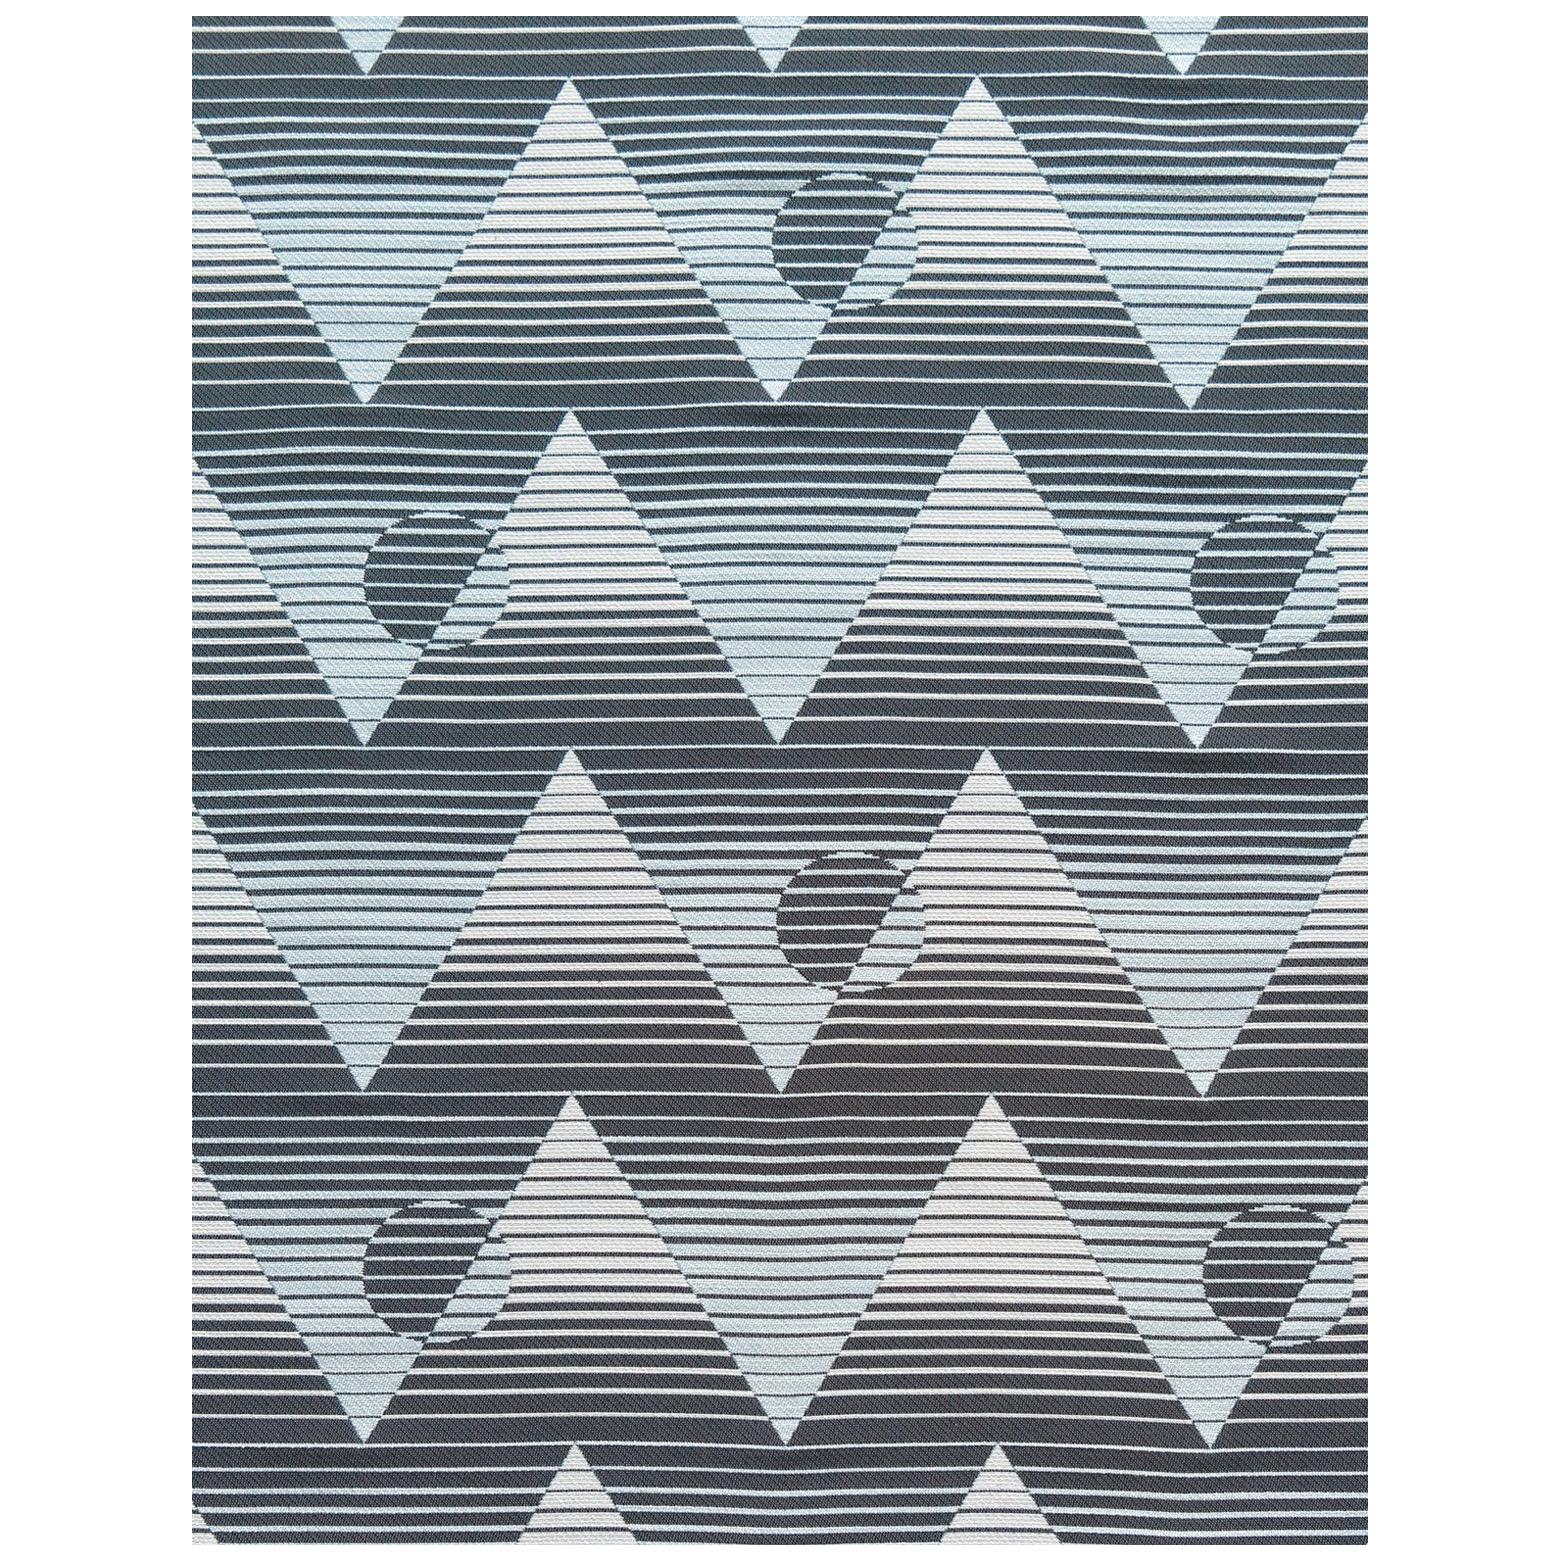 Pyramide Du Soleil Woven Commercial Grade Fabric in Halo, Black, White and Blue For Sale